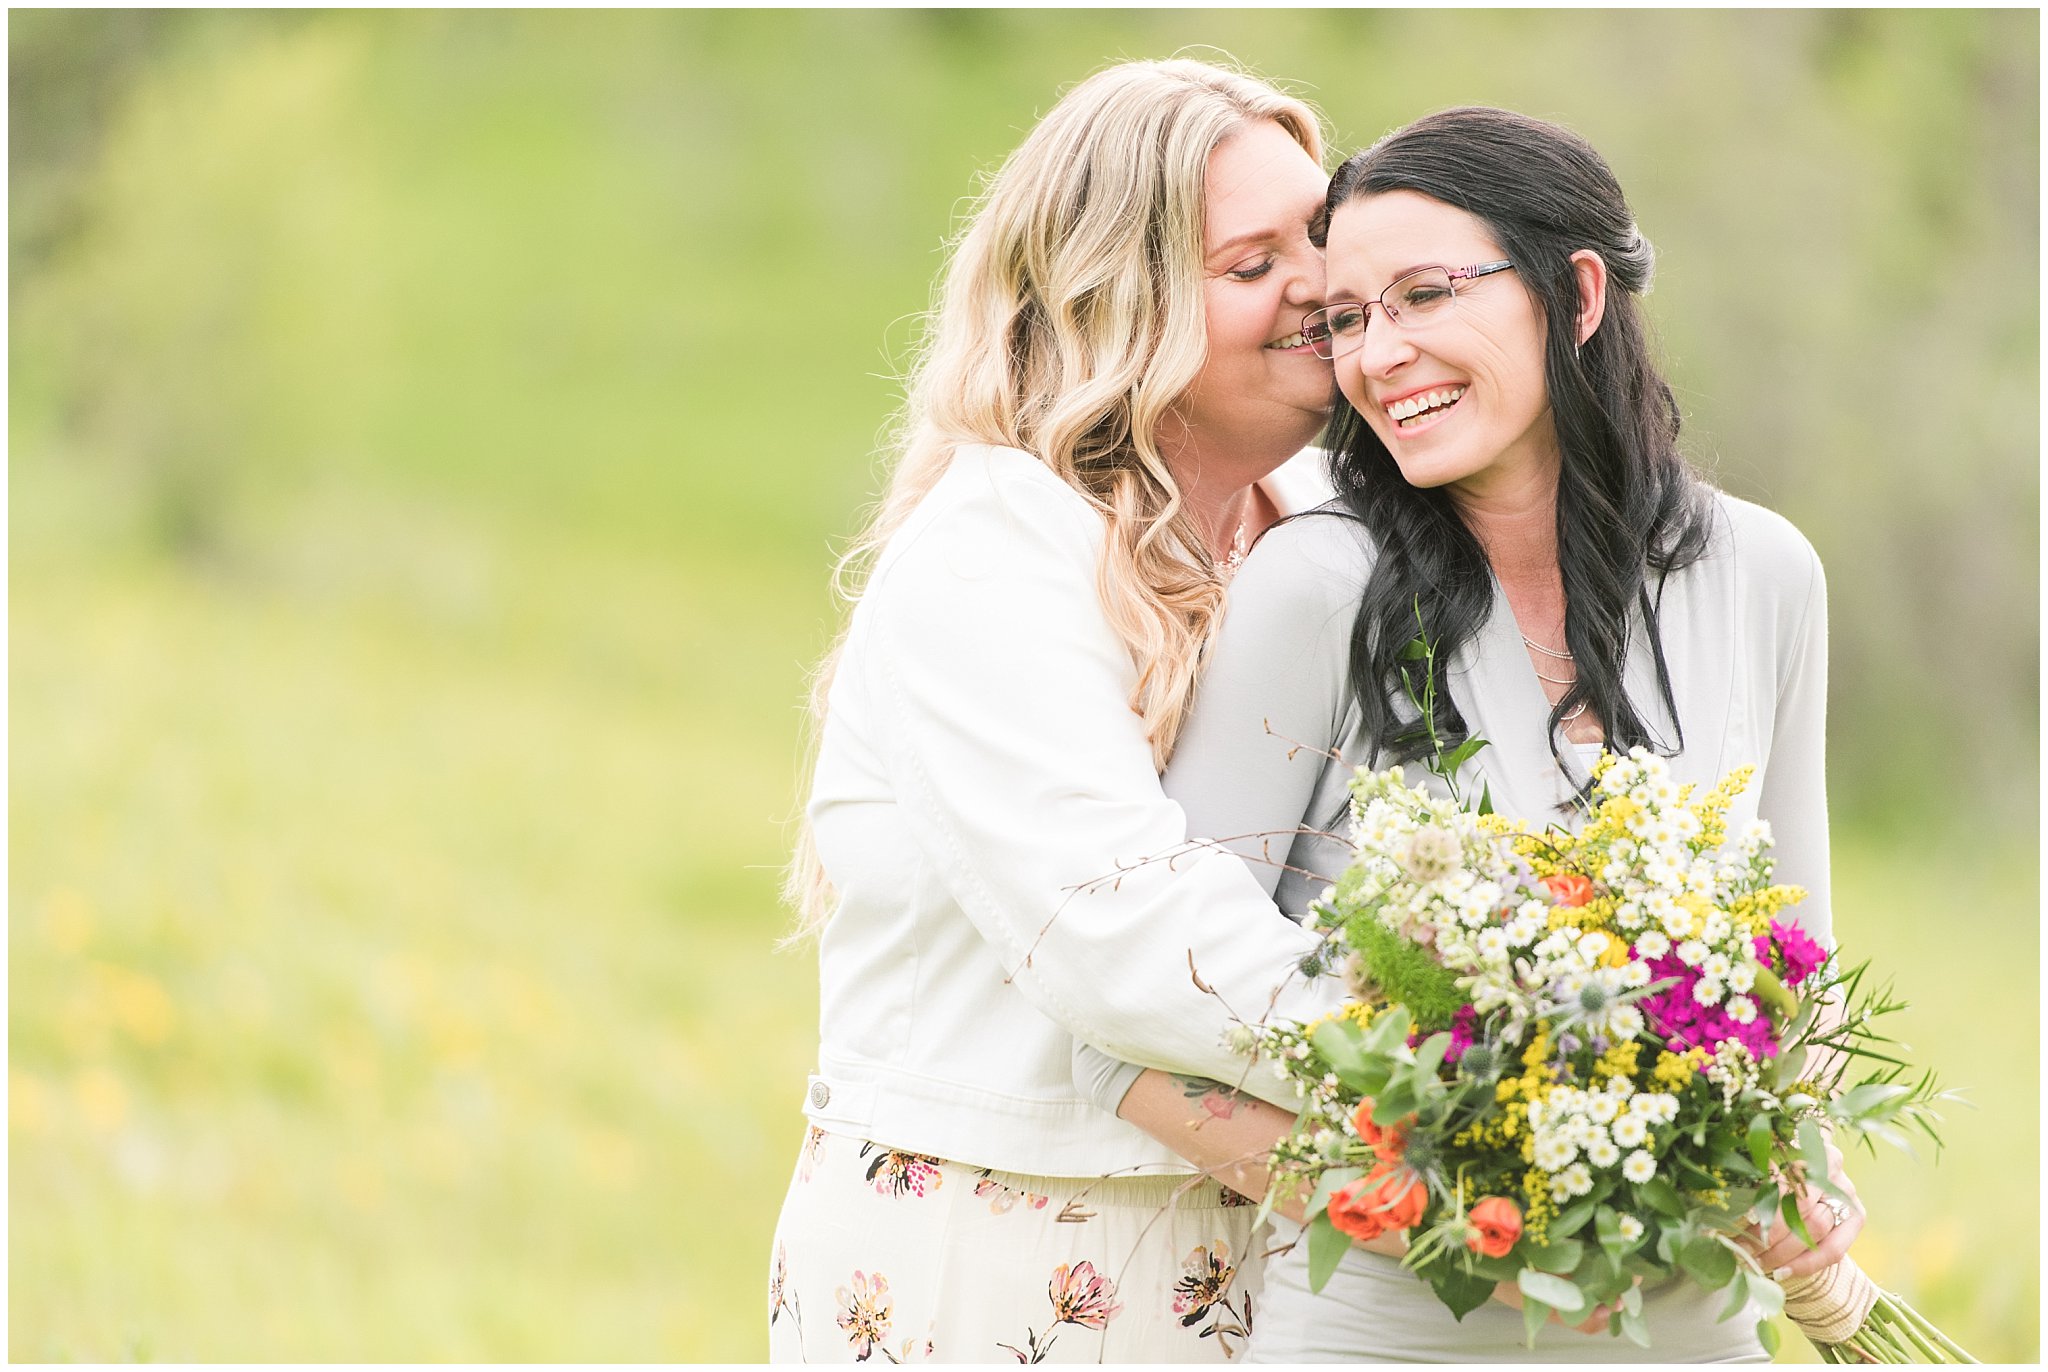 Couple in the Utah mountains with bouquet | Top Utah Wedding and Couples Photos 2019 | Jessie and Dallin Photography